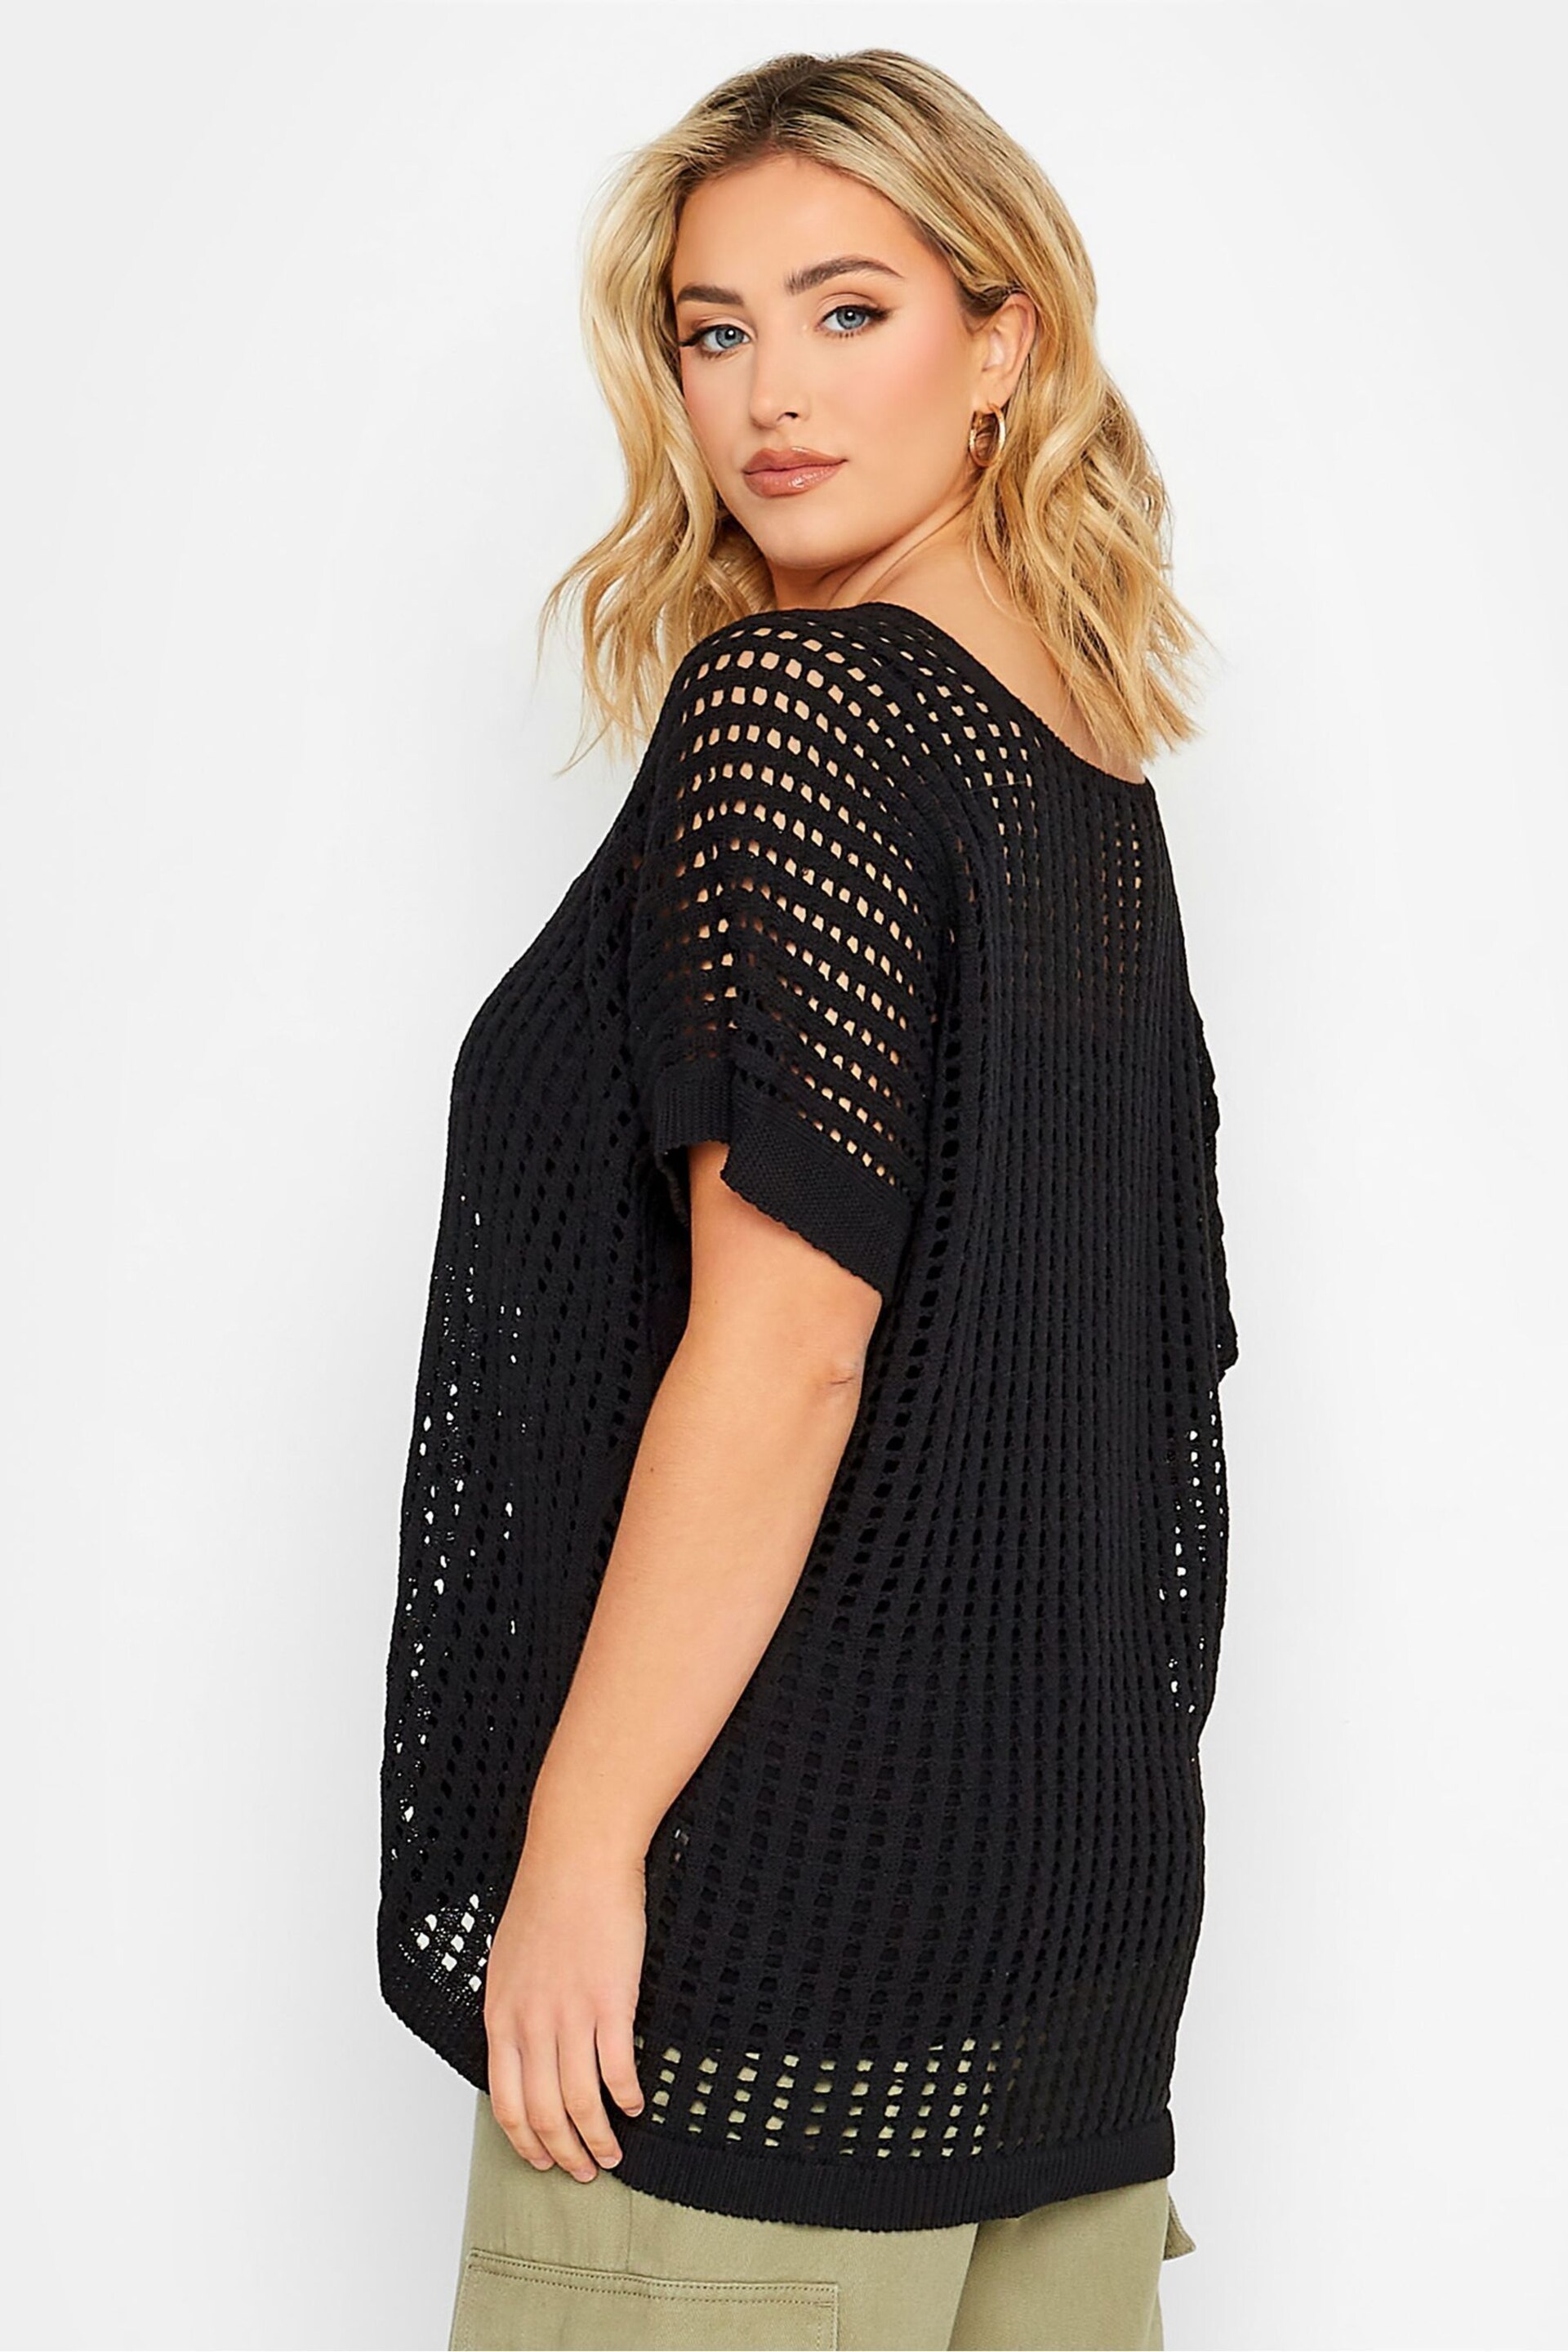 Yours Curve Black Crochet Boxy Cover-Up - Image 2 of 4